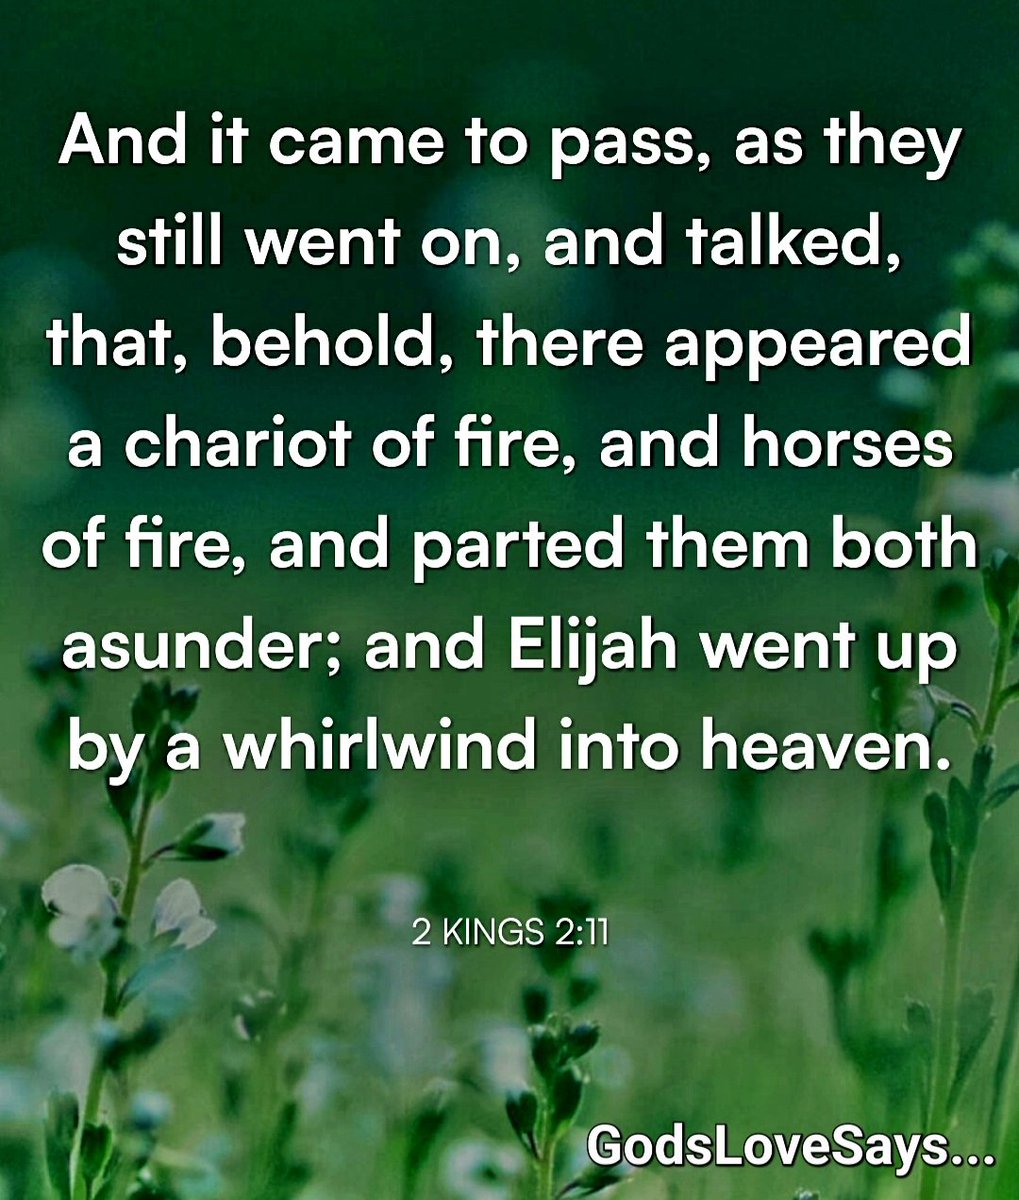 As they were walking along& talking together,suddenly a chariot of fire & horses of fire appeared& separated the two of them & Elijah went up to heaven in a whirlwind.
 🚶🏻‍♂️🔥🐎☁️🌪
2Kings2:11
#GodsLoveSays #2kings #walking #talking #chariot #fire #horses #separated #Elijah #wentup